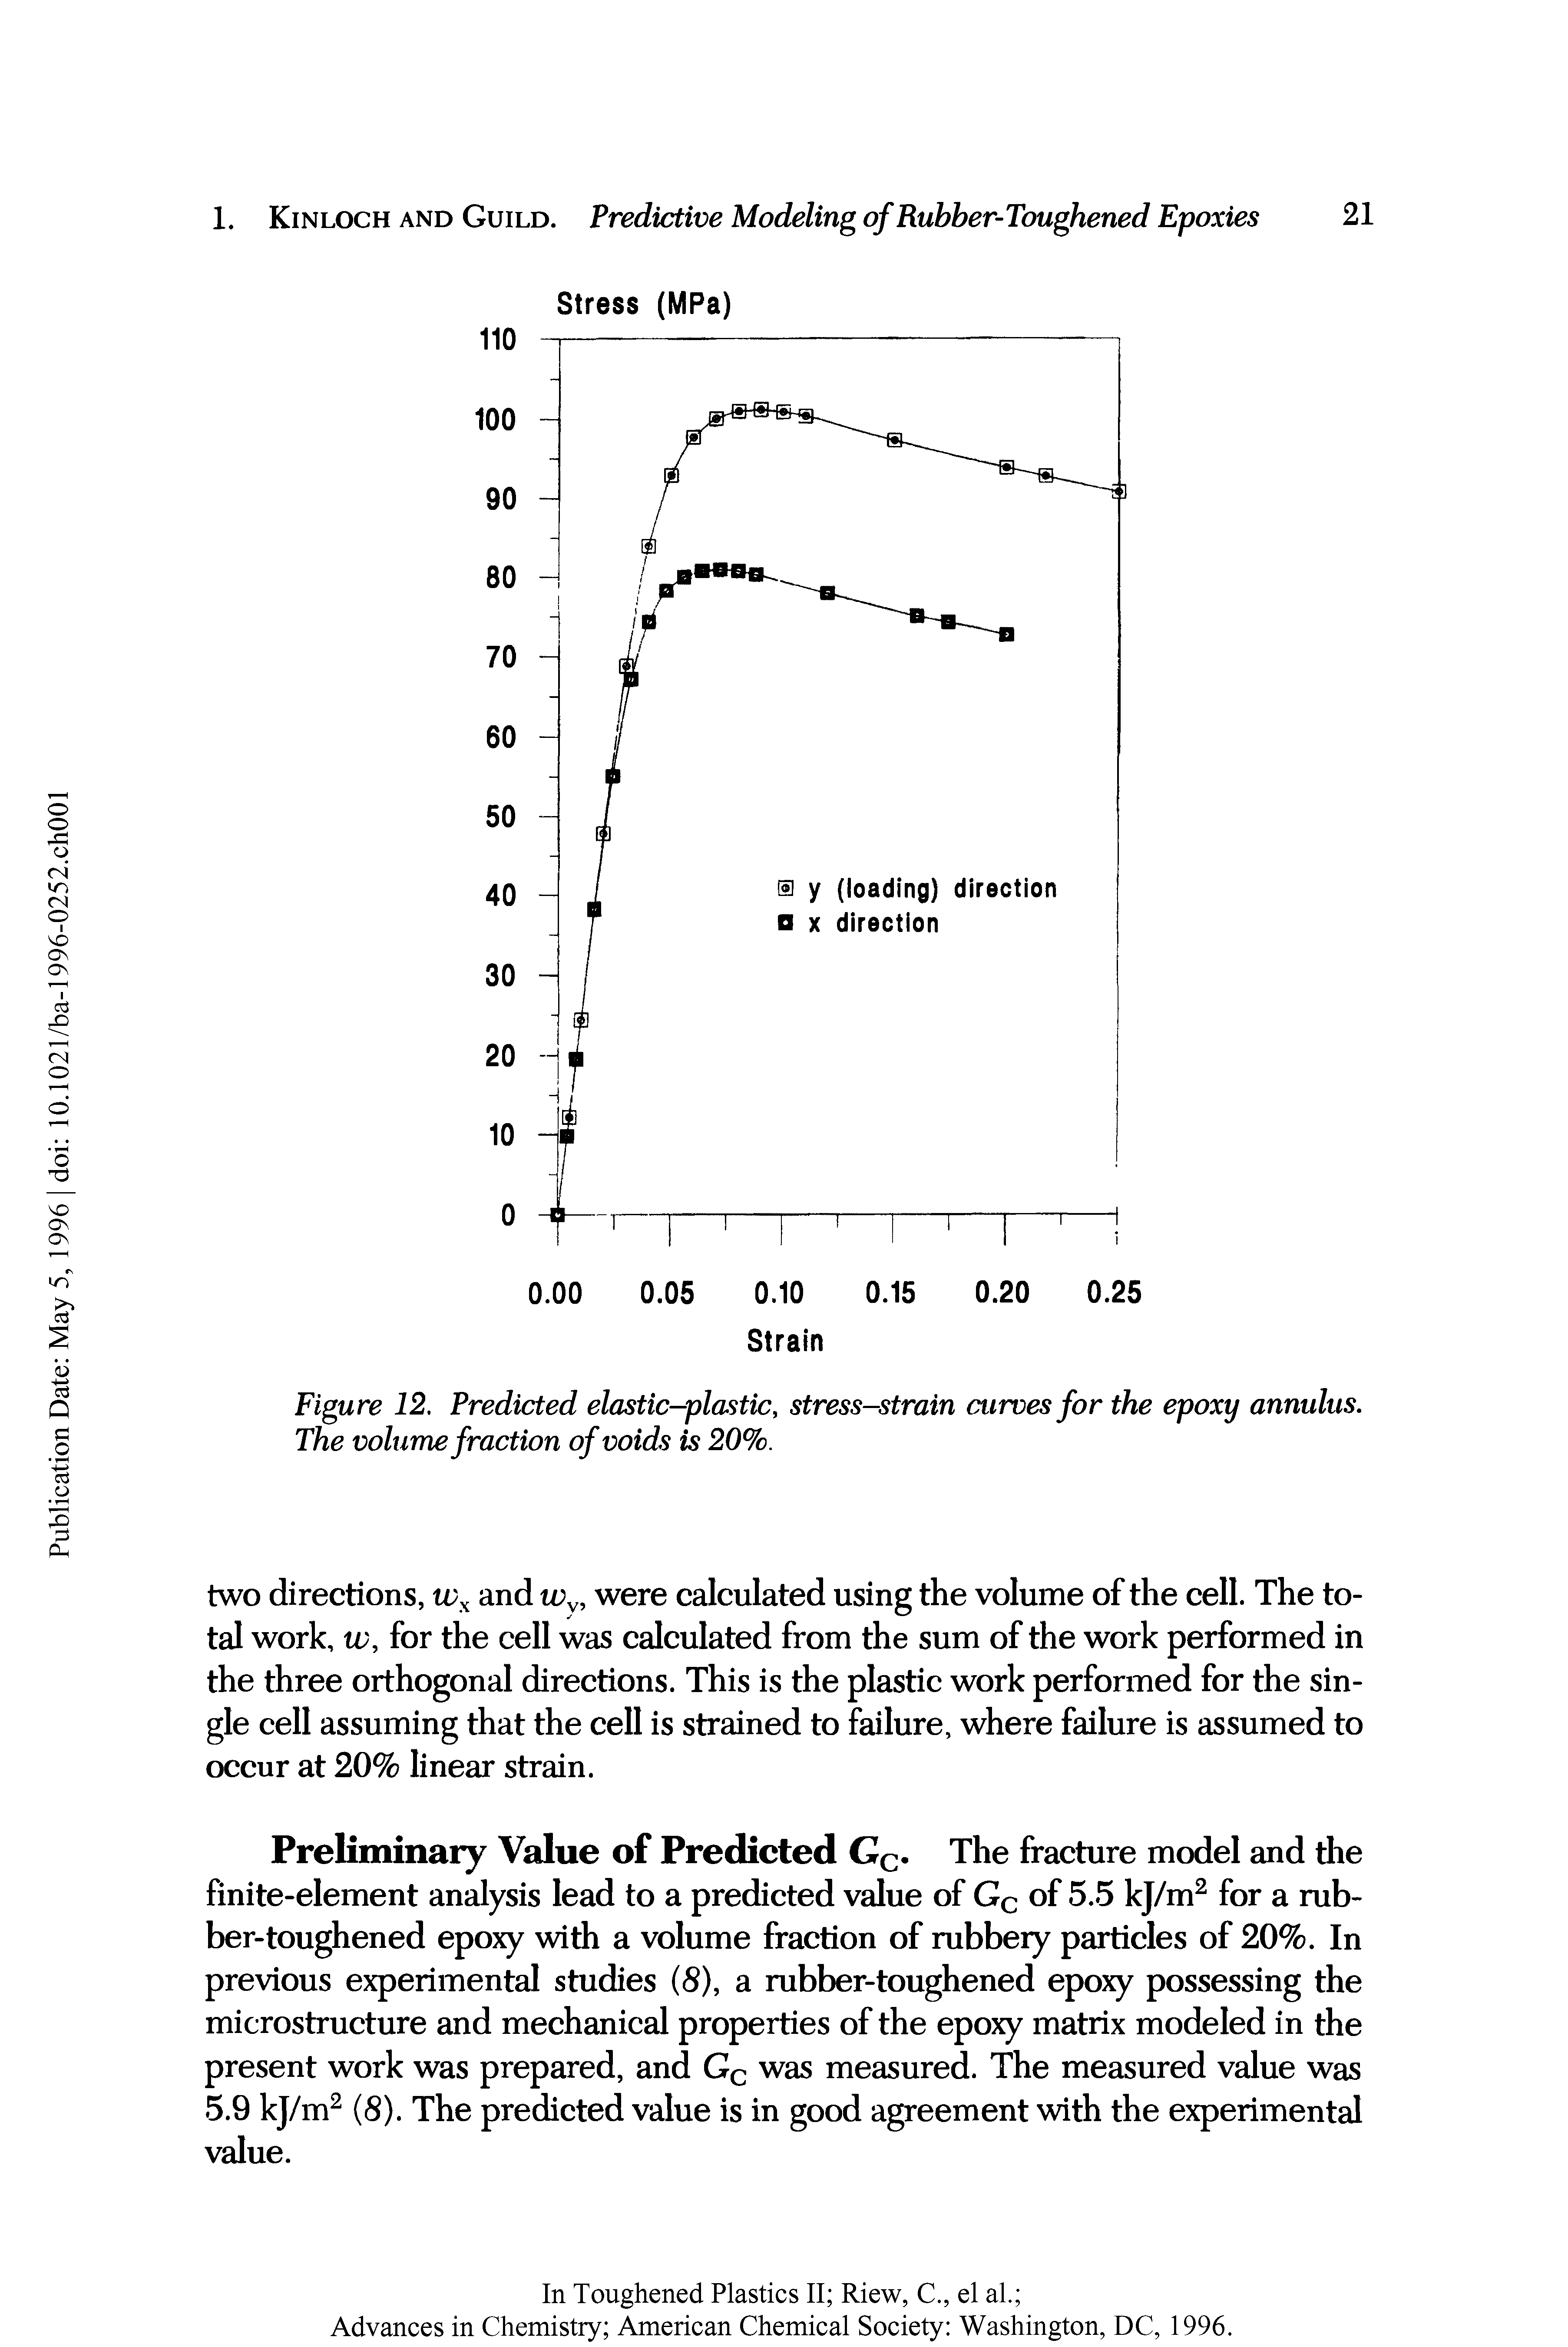 Figure 12. Predicted elastic-plastic, stress-strain curves for the epoxy annulus. The volume fraction of voids is 20%.